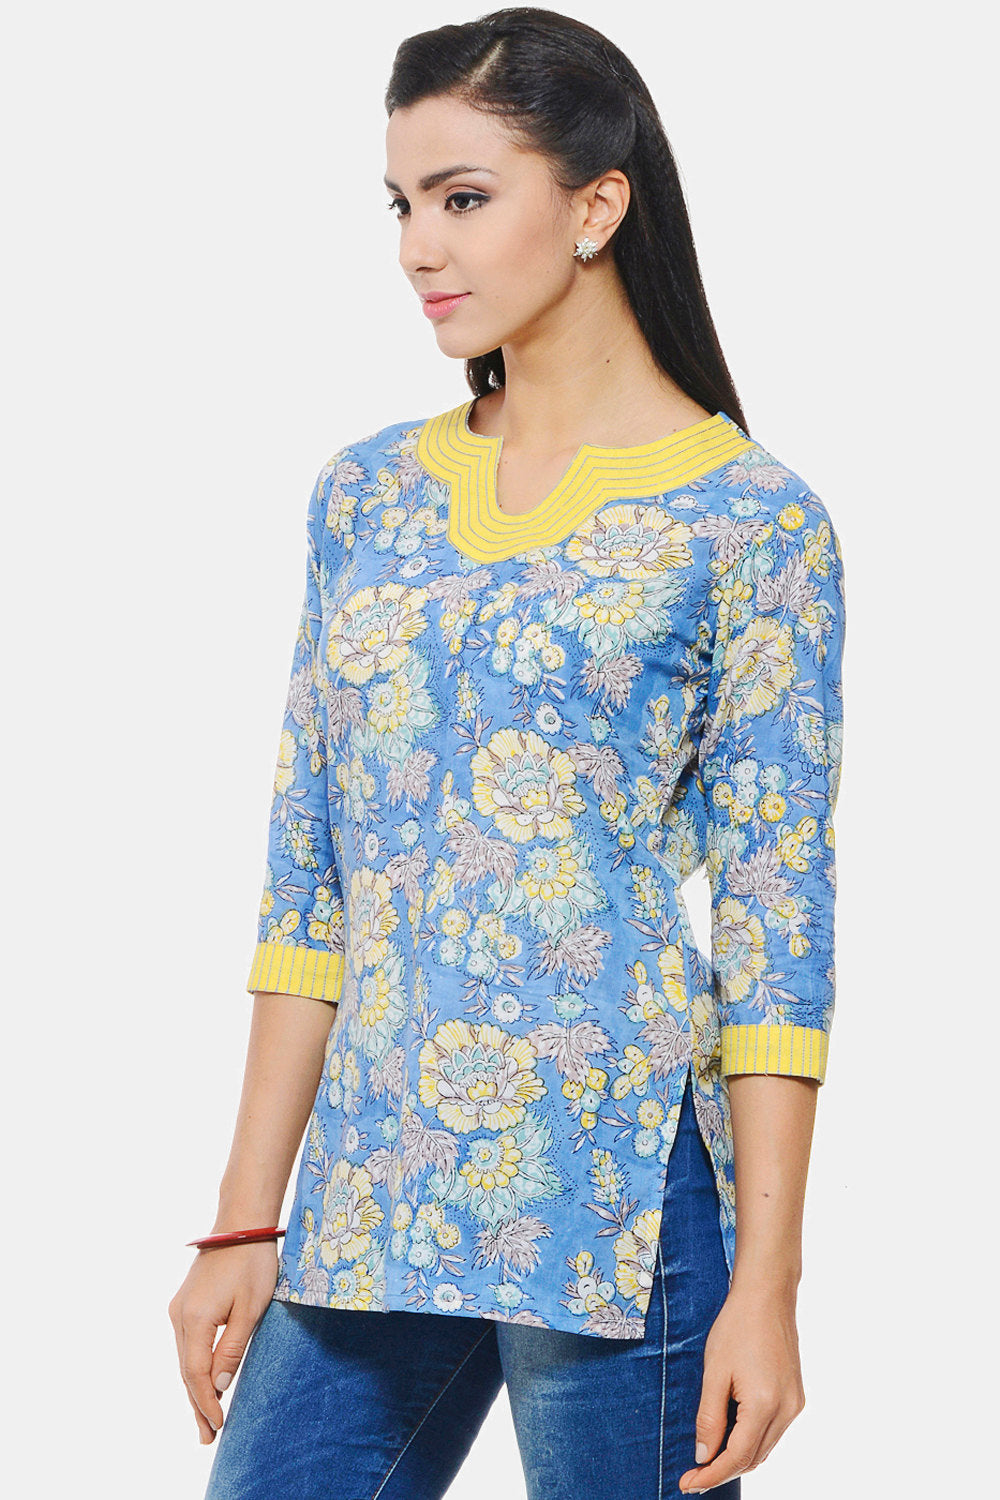 Hand Block Printed Indian Kurti in blue floral design with Embroidery on neck and sleeves